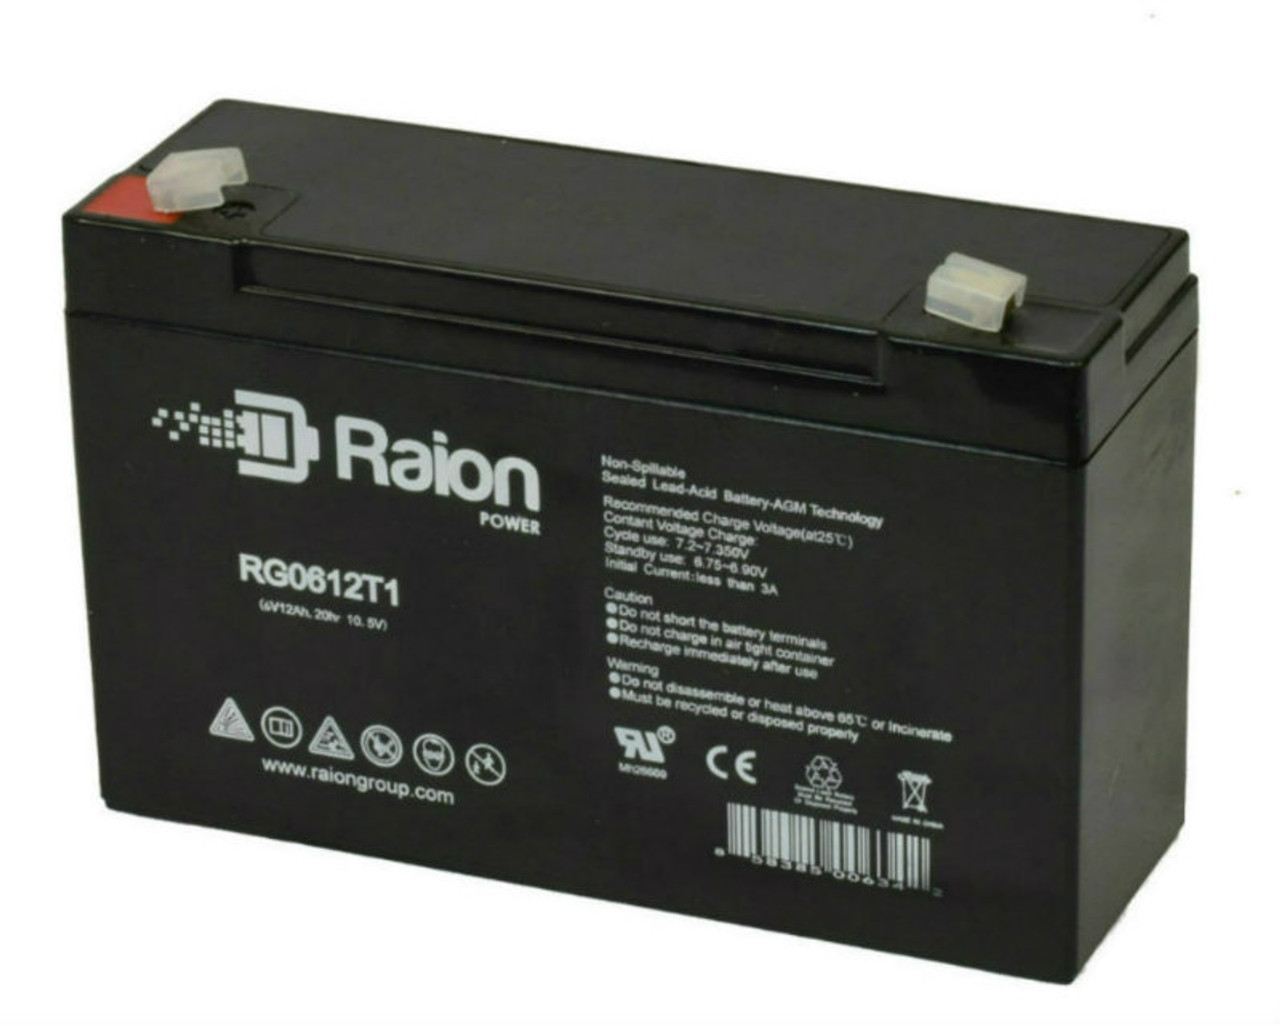 Raion Power RG06120T1 Replacement Battery for Guardian DG6-10F-F2